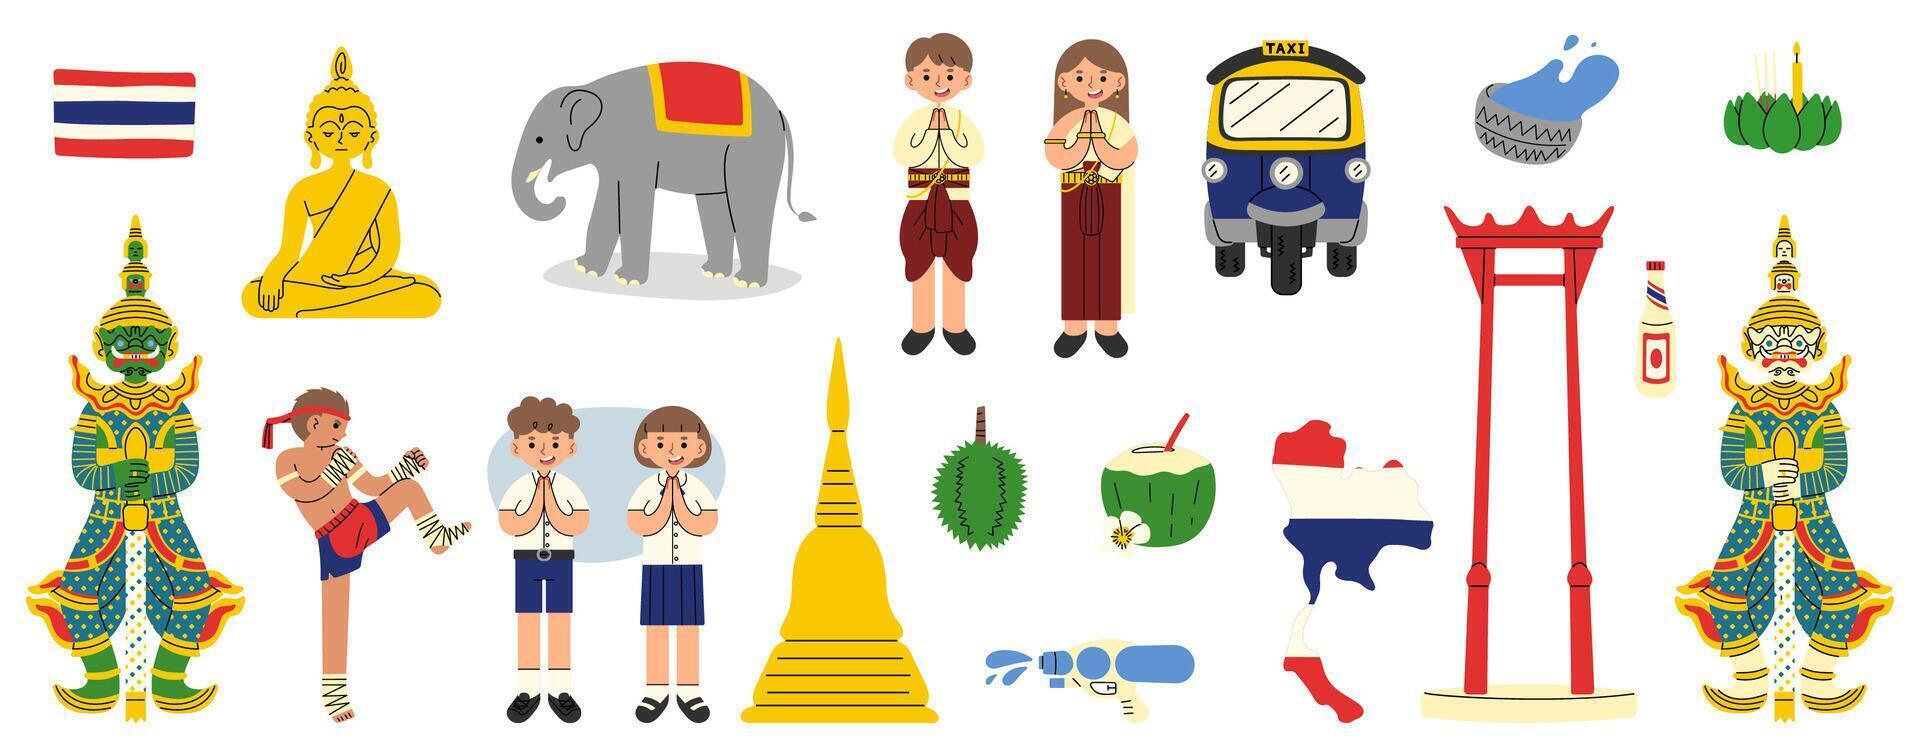 Thailand Collection 1 cute on a white background, illustration. vector